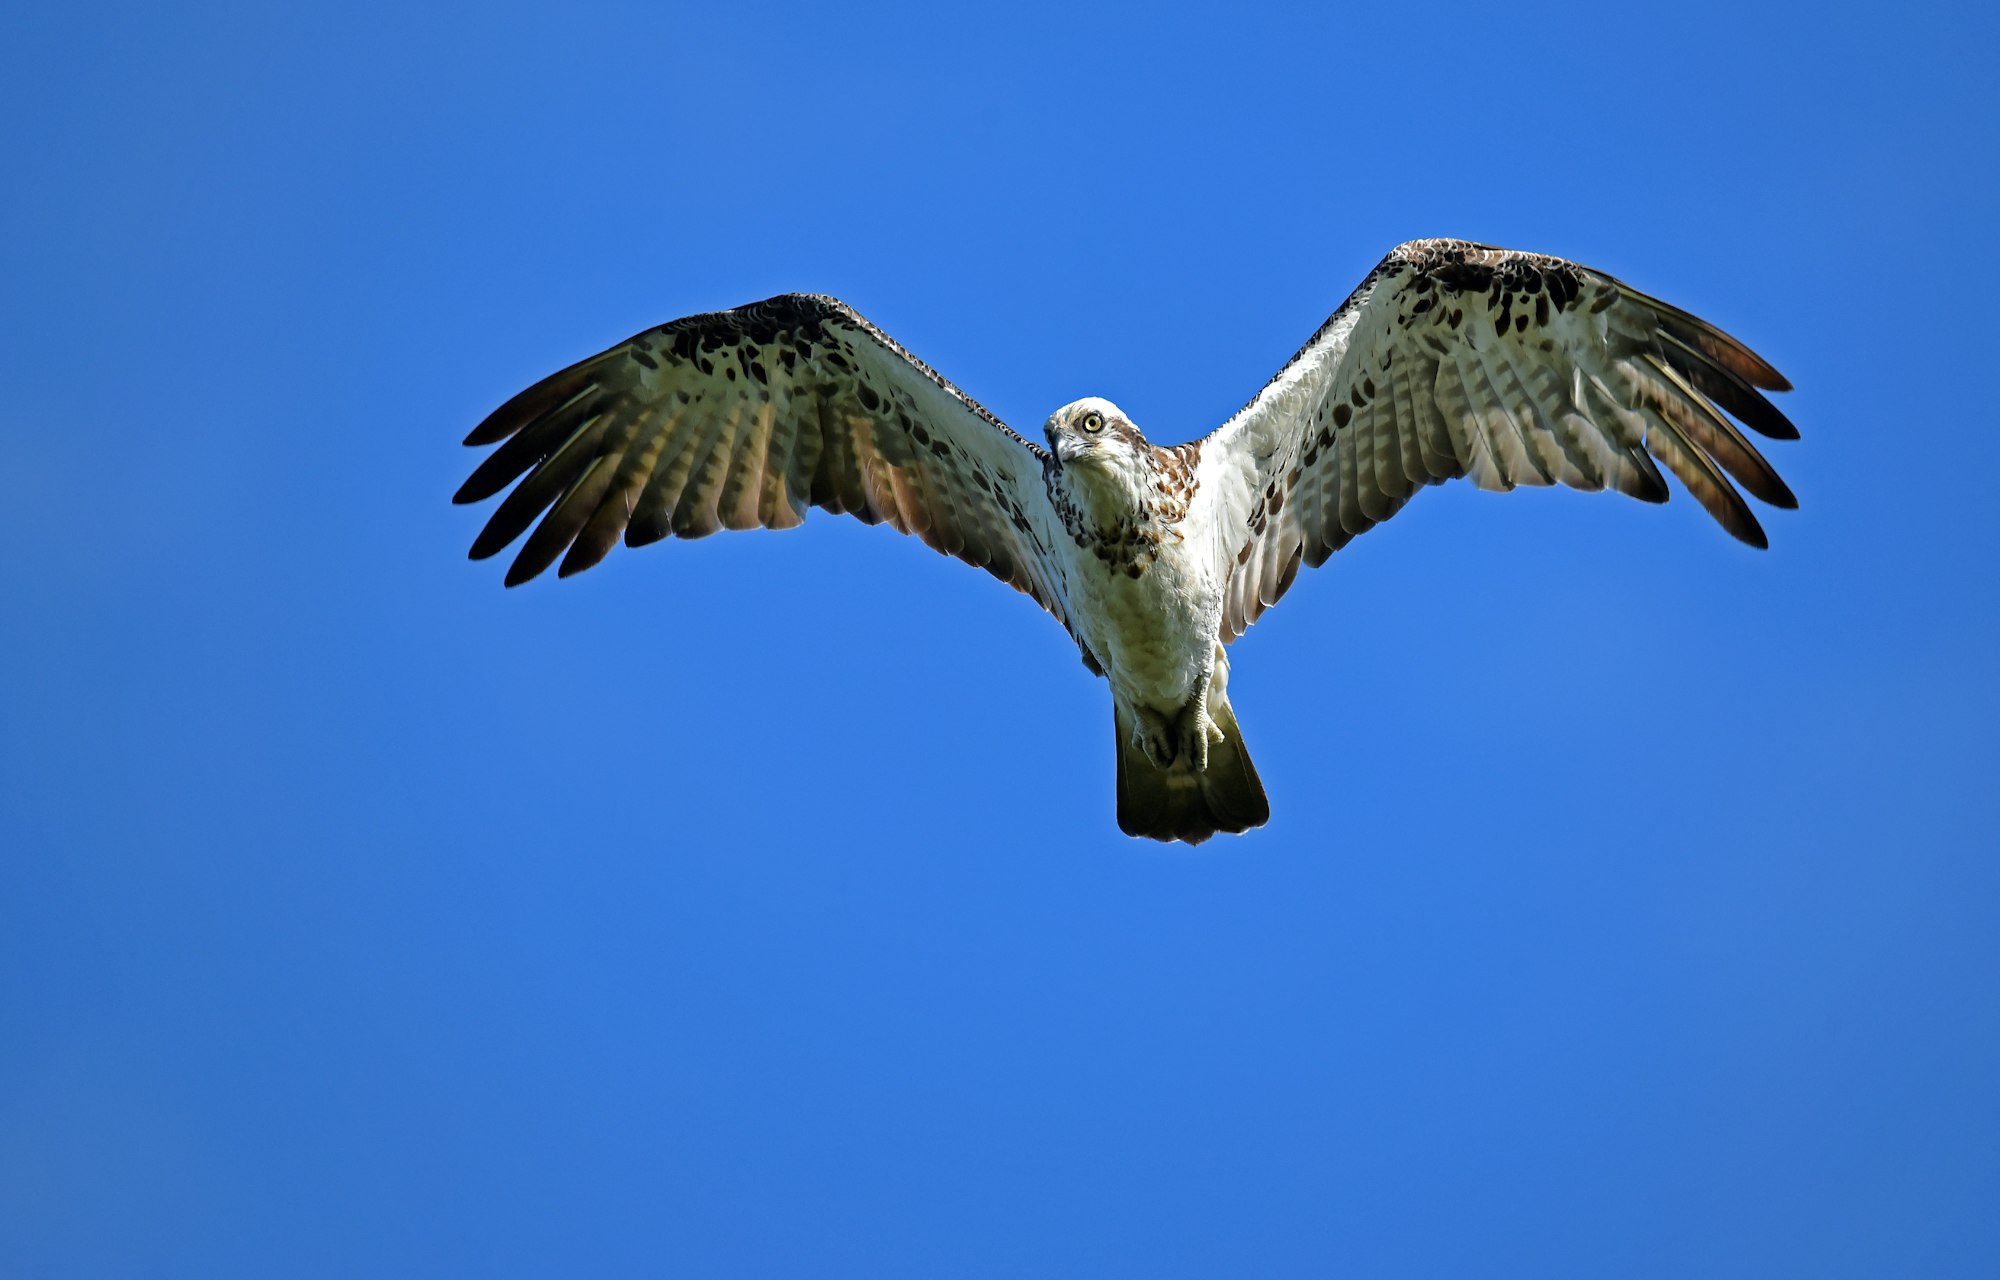 This osprey was using its sharp eyes looking for a fish for breakfast, as it flew over one of the lakes at the Cattana wetlands, Cairns, Australia.